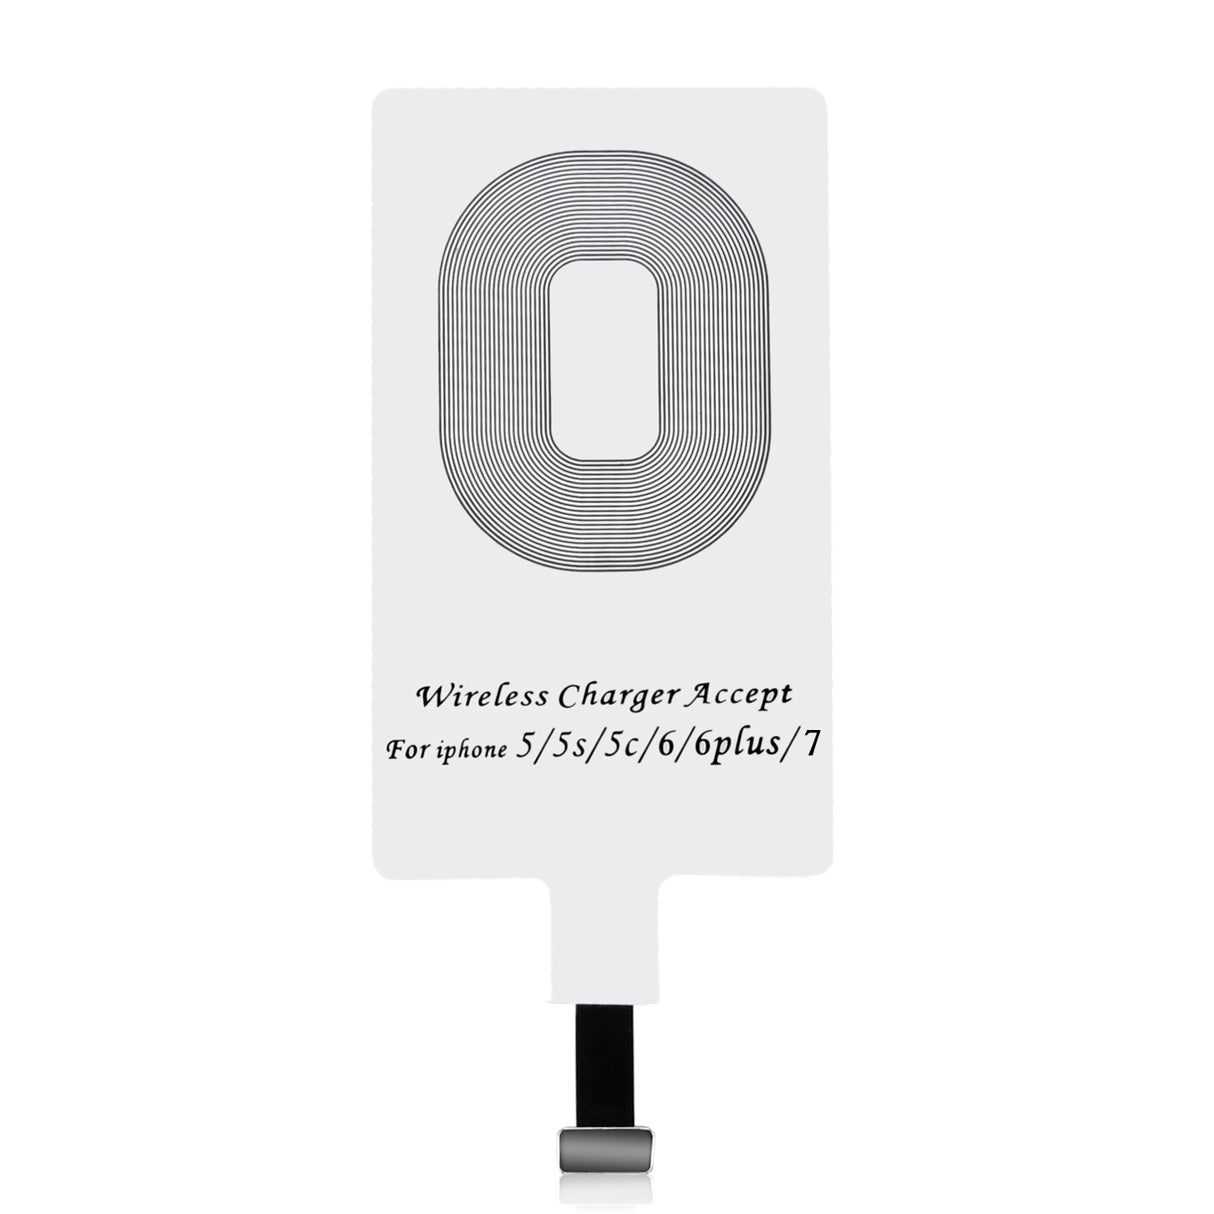 WP-IP CHOETECH Qi Receiver, Ultra Thin Wireless Charging Qi Receiver Wireless Charging Receiver Patch Module Chip Compatible with Apple iPhone 7/7 Plus, iPhone 6/6 Plus, iPhone 5/5s/5c iOS Receiver